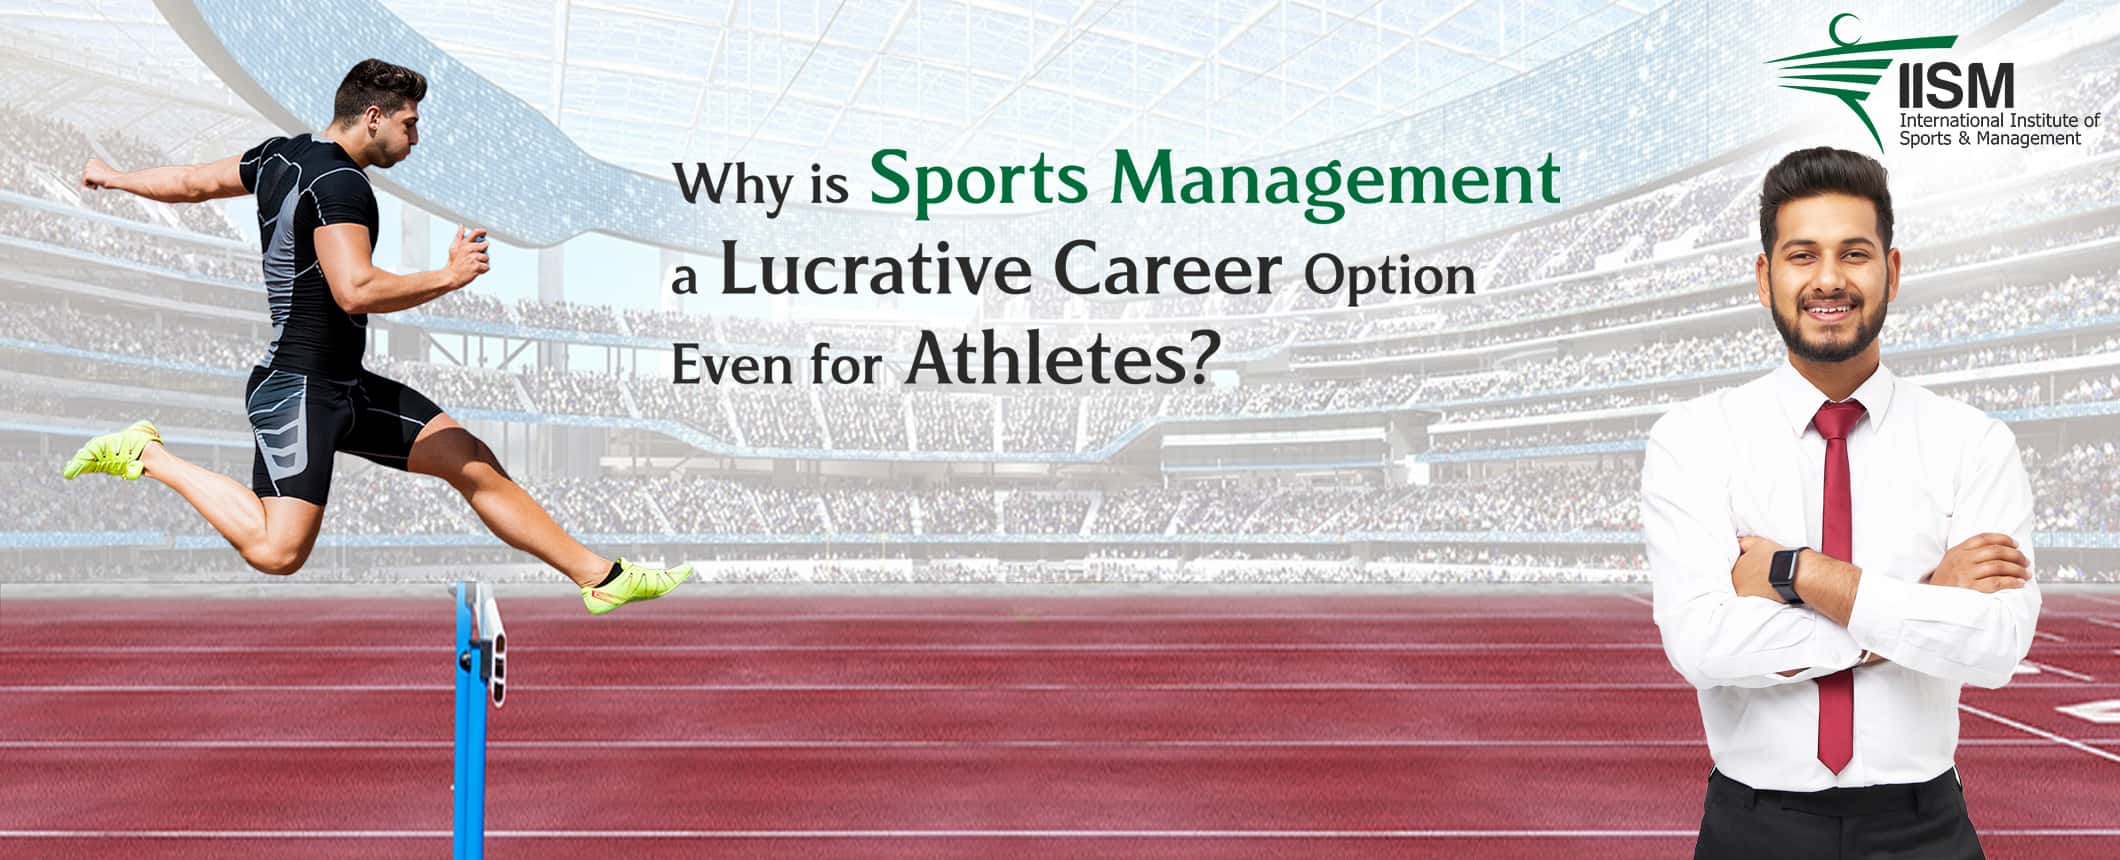 Why is Sports Management a Lucrative Career Option Even for